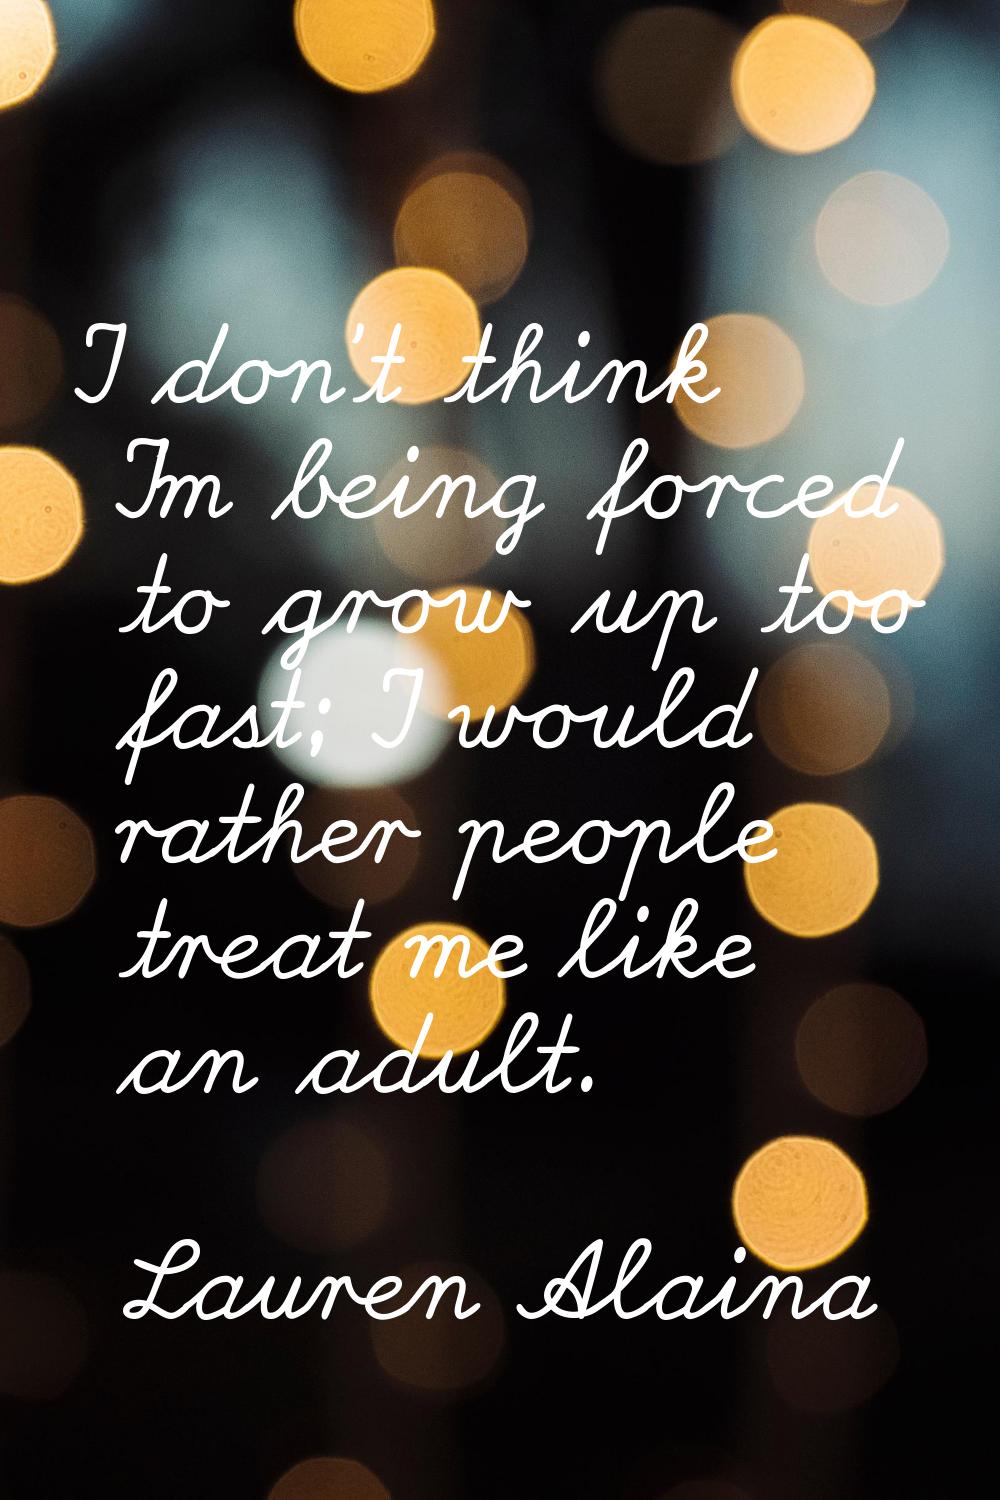 I don't think I'm being forced to grow up too fast; I would rather people treat me like an adult.